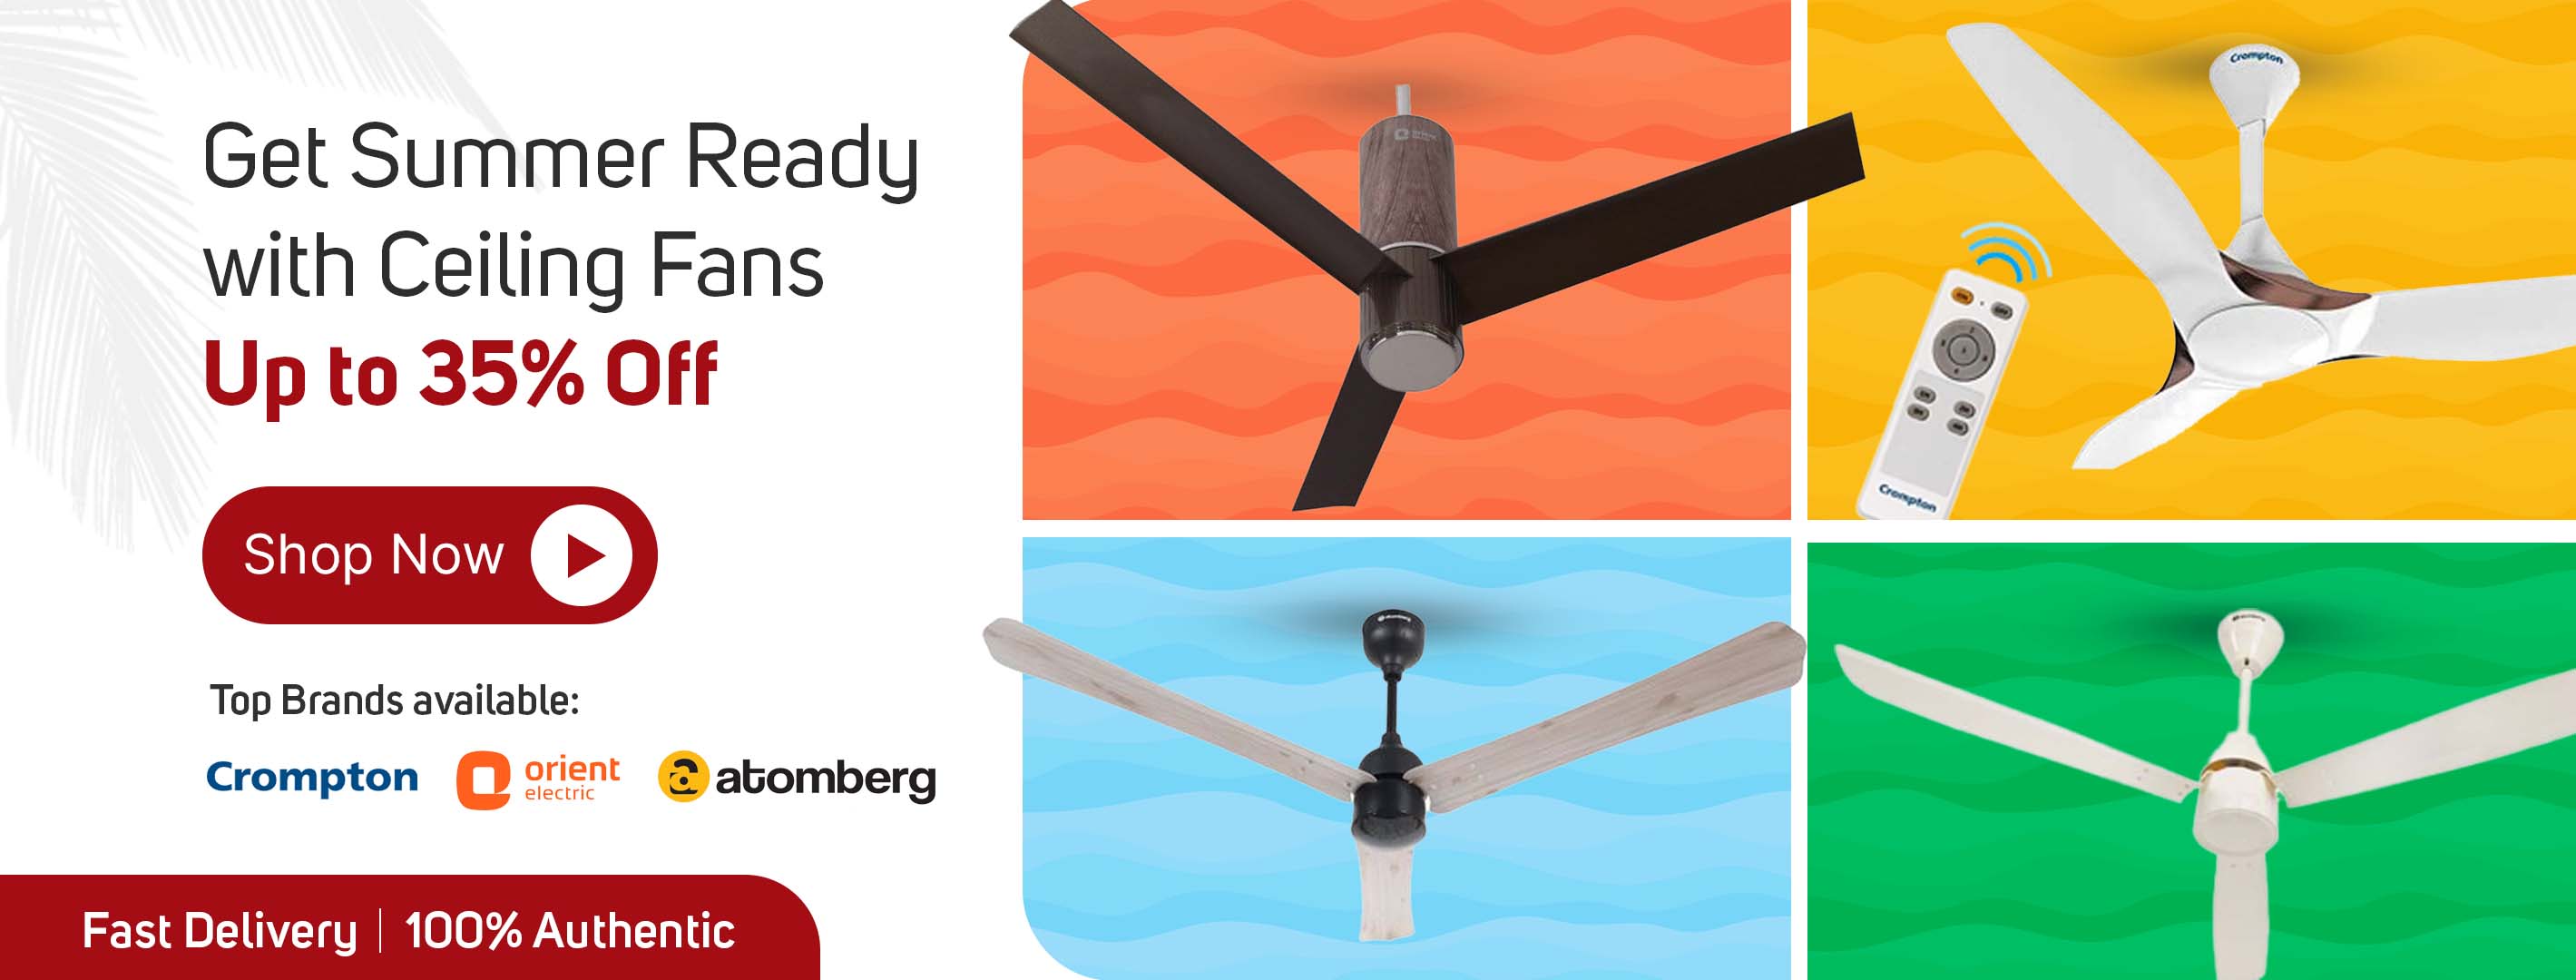 Up to 35% off on Ceiling Fans